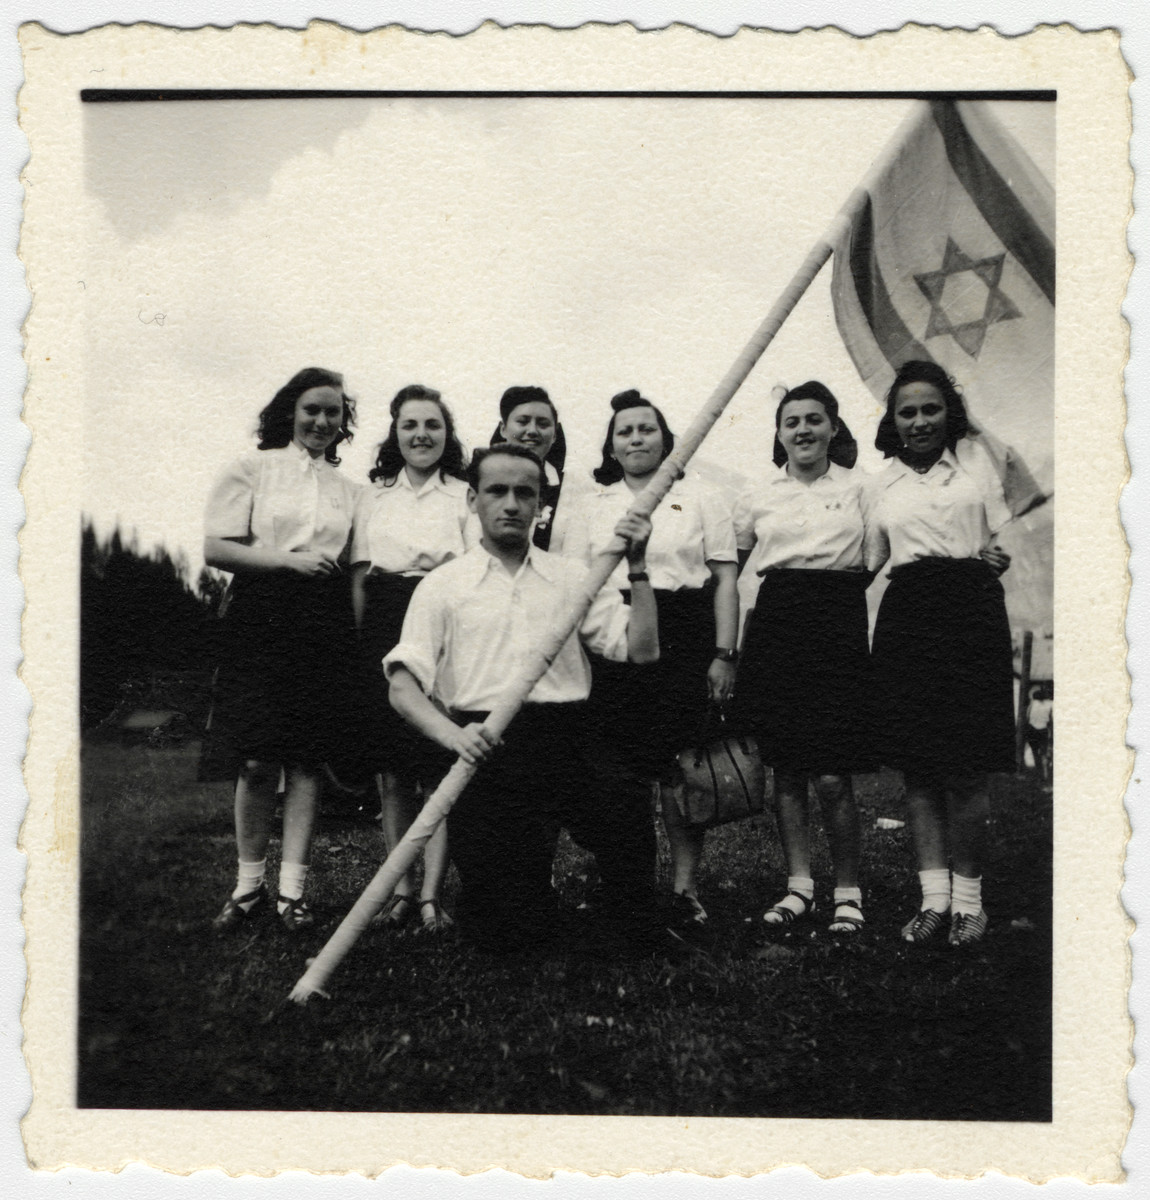 A group of teenage girls from the Chaim Nachman Bialik school in  Bad Gastein pose in front of a Zionist flag.

Among those pictured are Esther Ass (far right) and Chana Chamanovitch (second from the left).